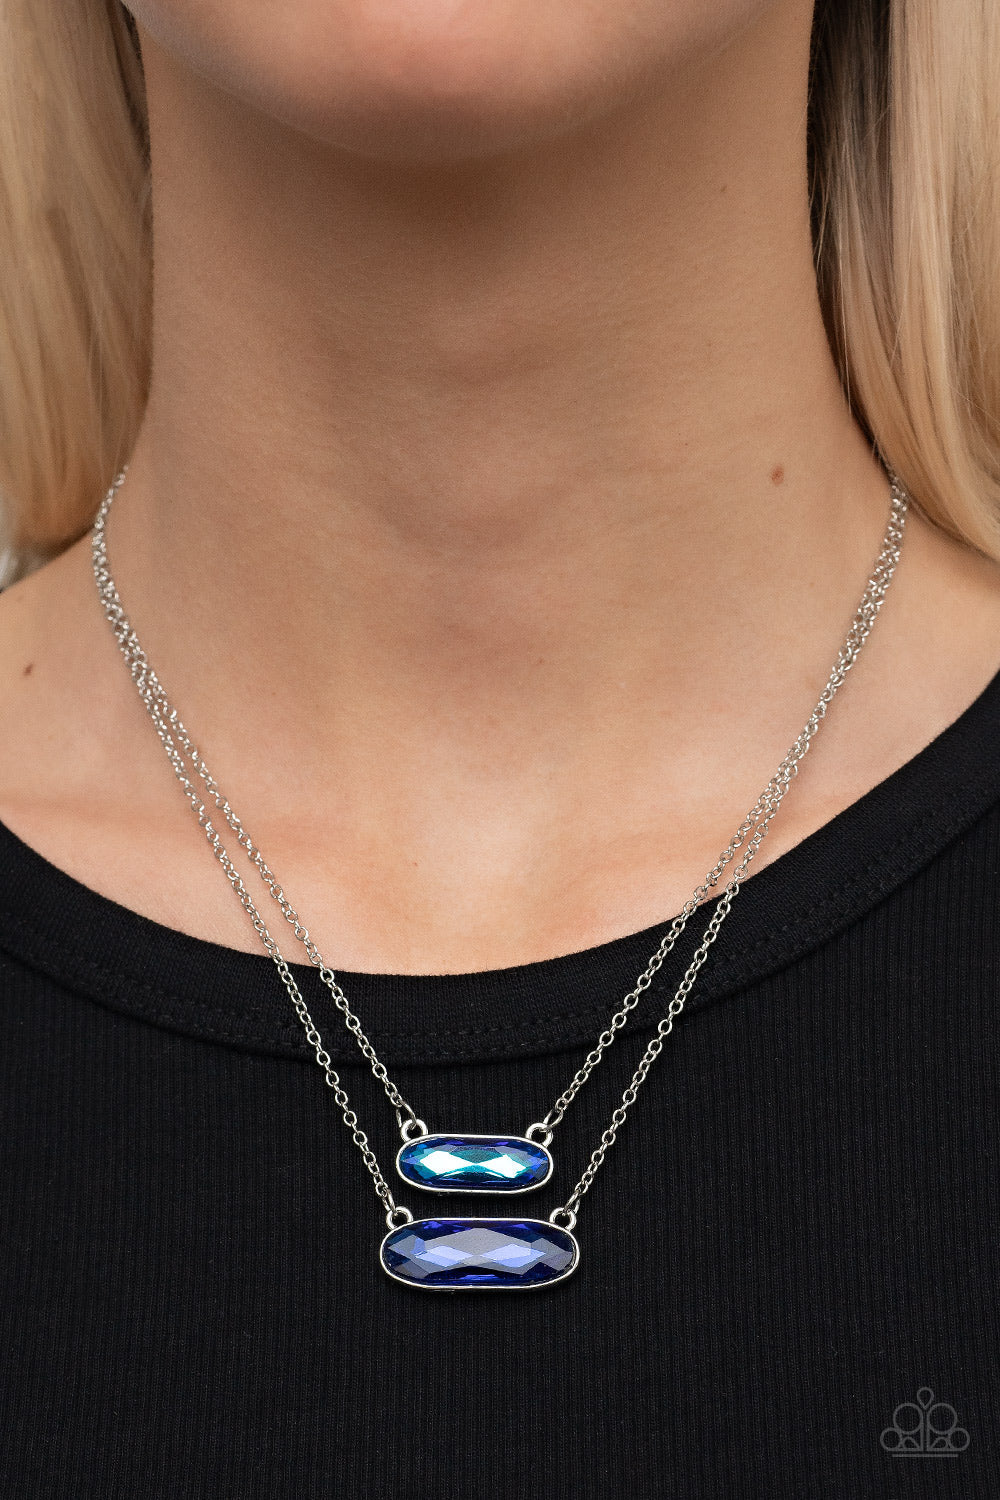 Double Bubble Burst - UV Blue Gem - Silver Necklace - Paparazzi Accessories - UV blue gem is delicately suspended above a slightly larger glittery blue gem below the collar for a stellar double-stacked display.